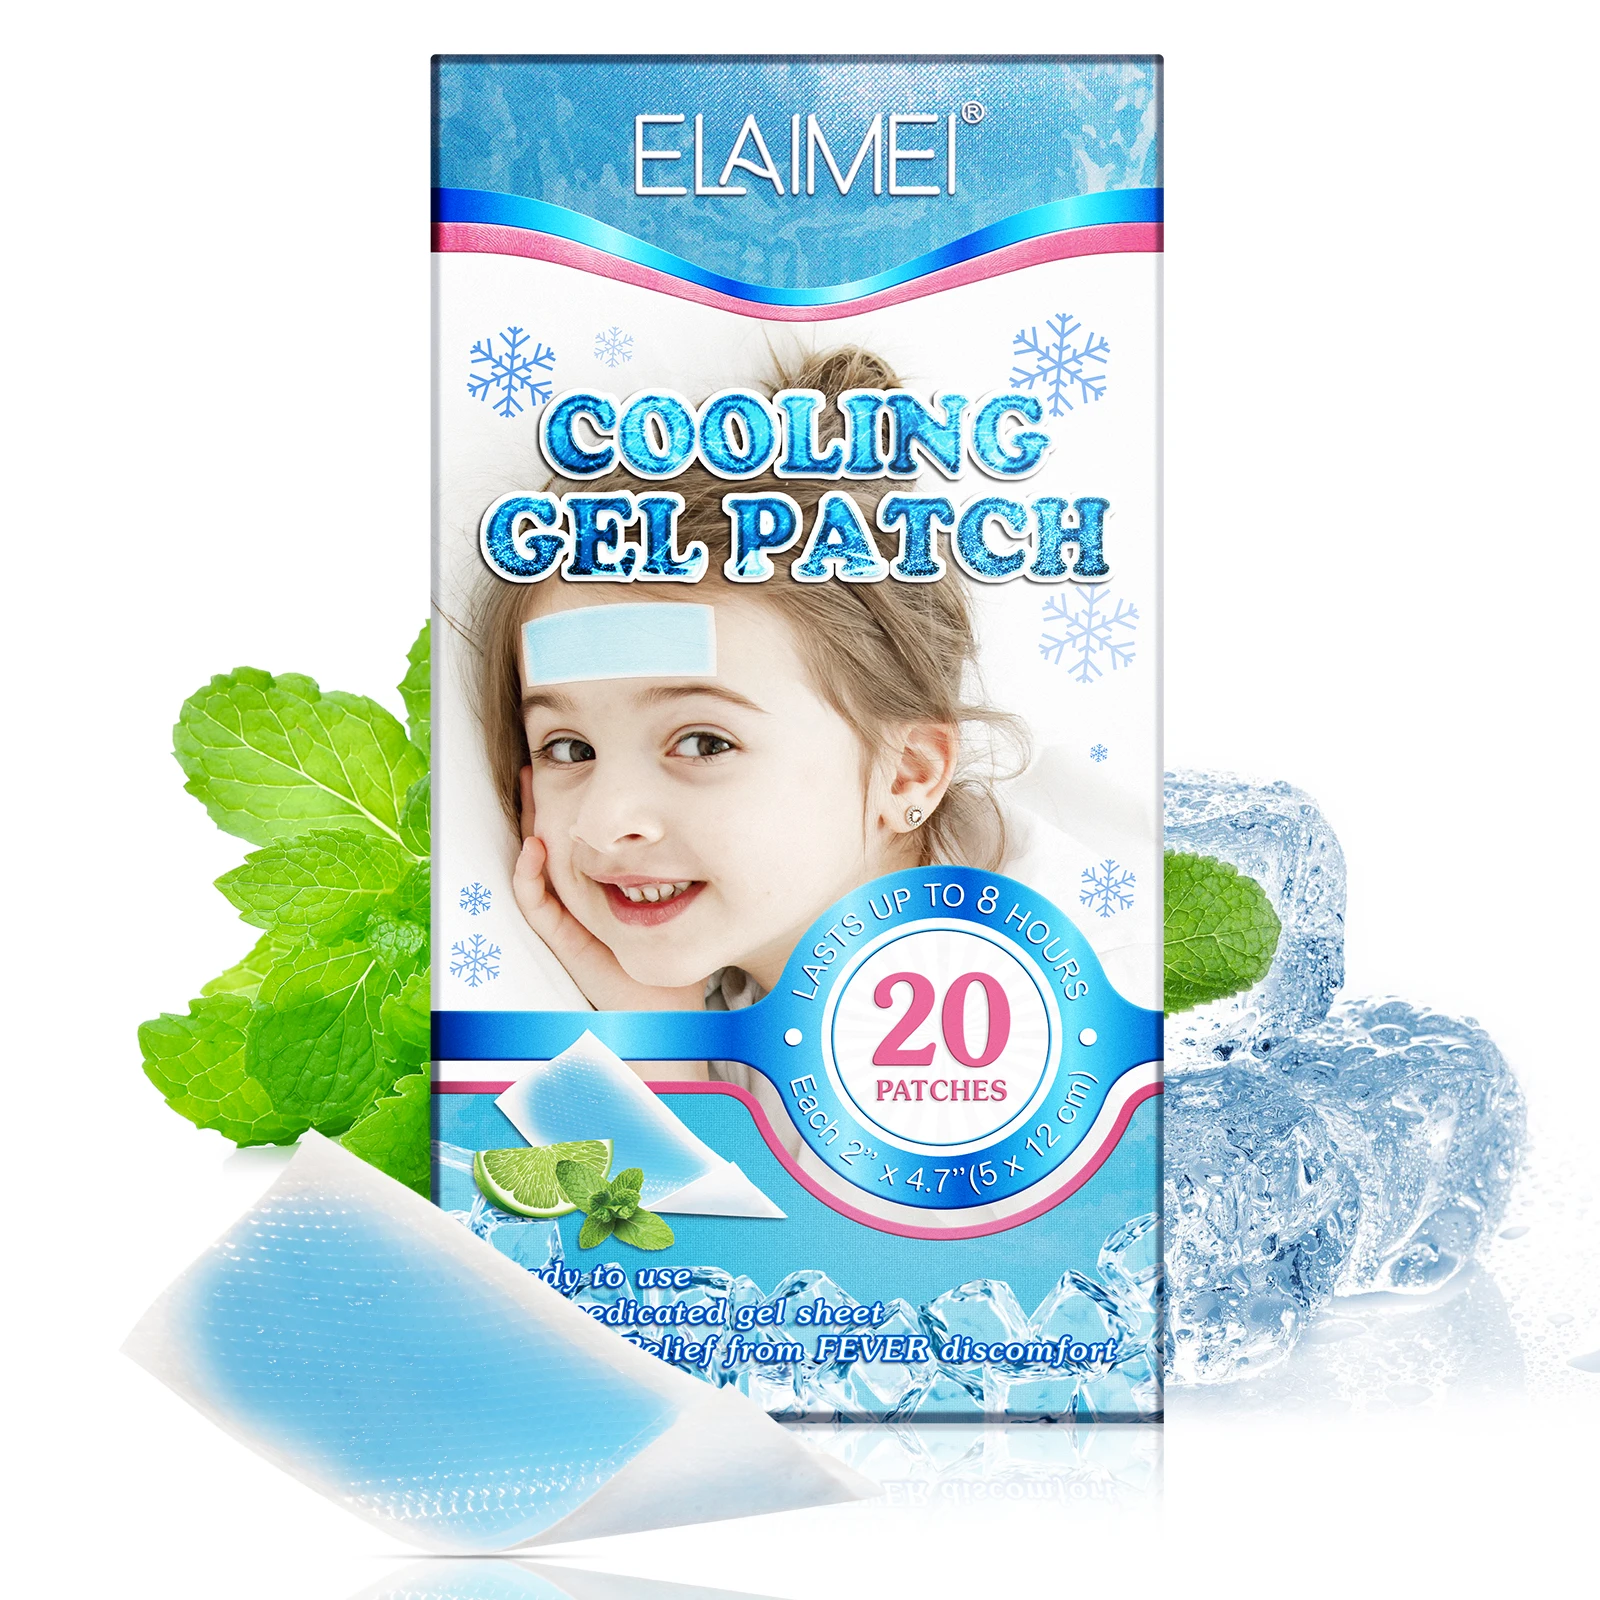 

ELAIMEI Hydrogel Non-medicated Physical Safety Gently Skin Friendly Reducing Fever Cooling Gel Patch